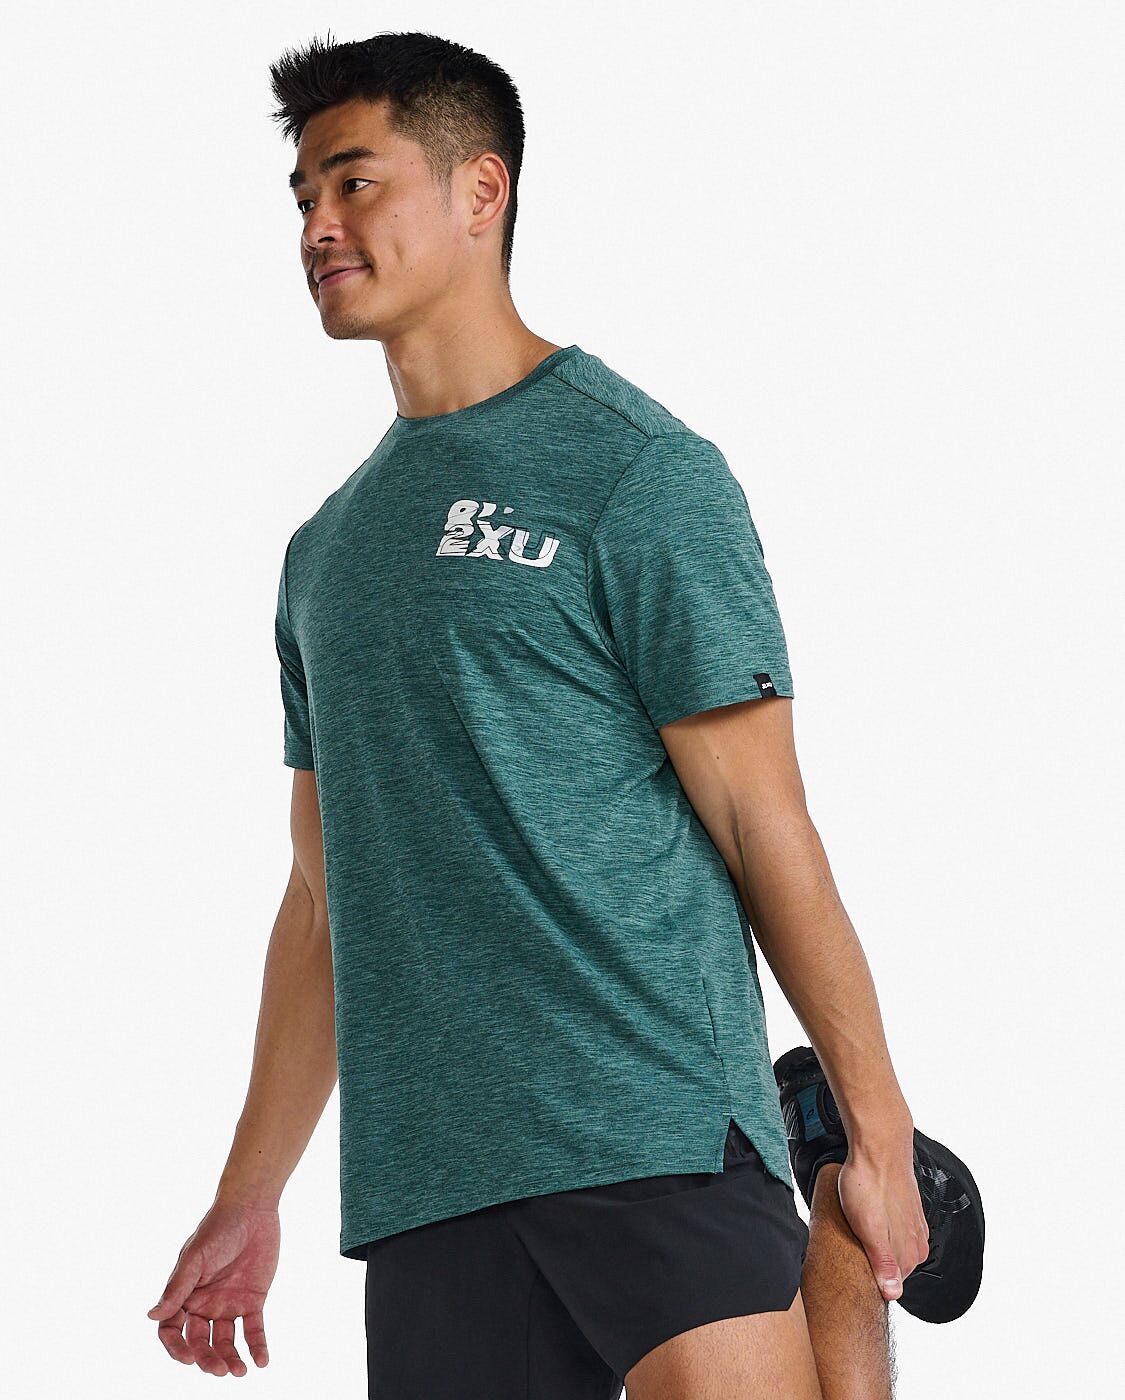 2XU South Africa - Mens Motion Graphic Tee - RAF/PNE